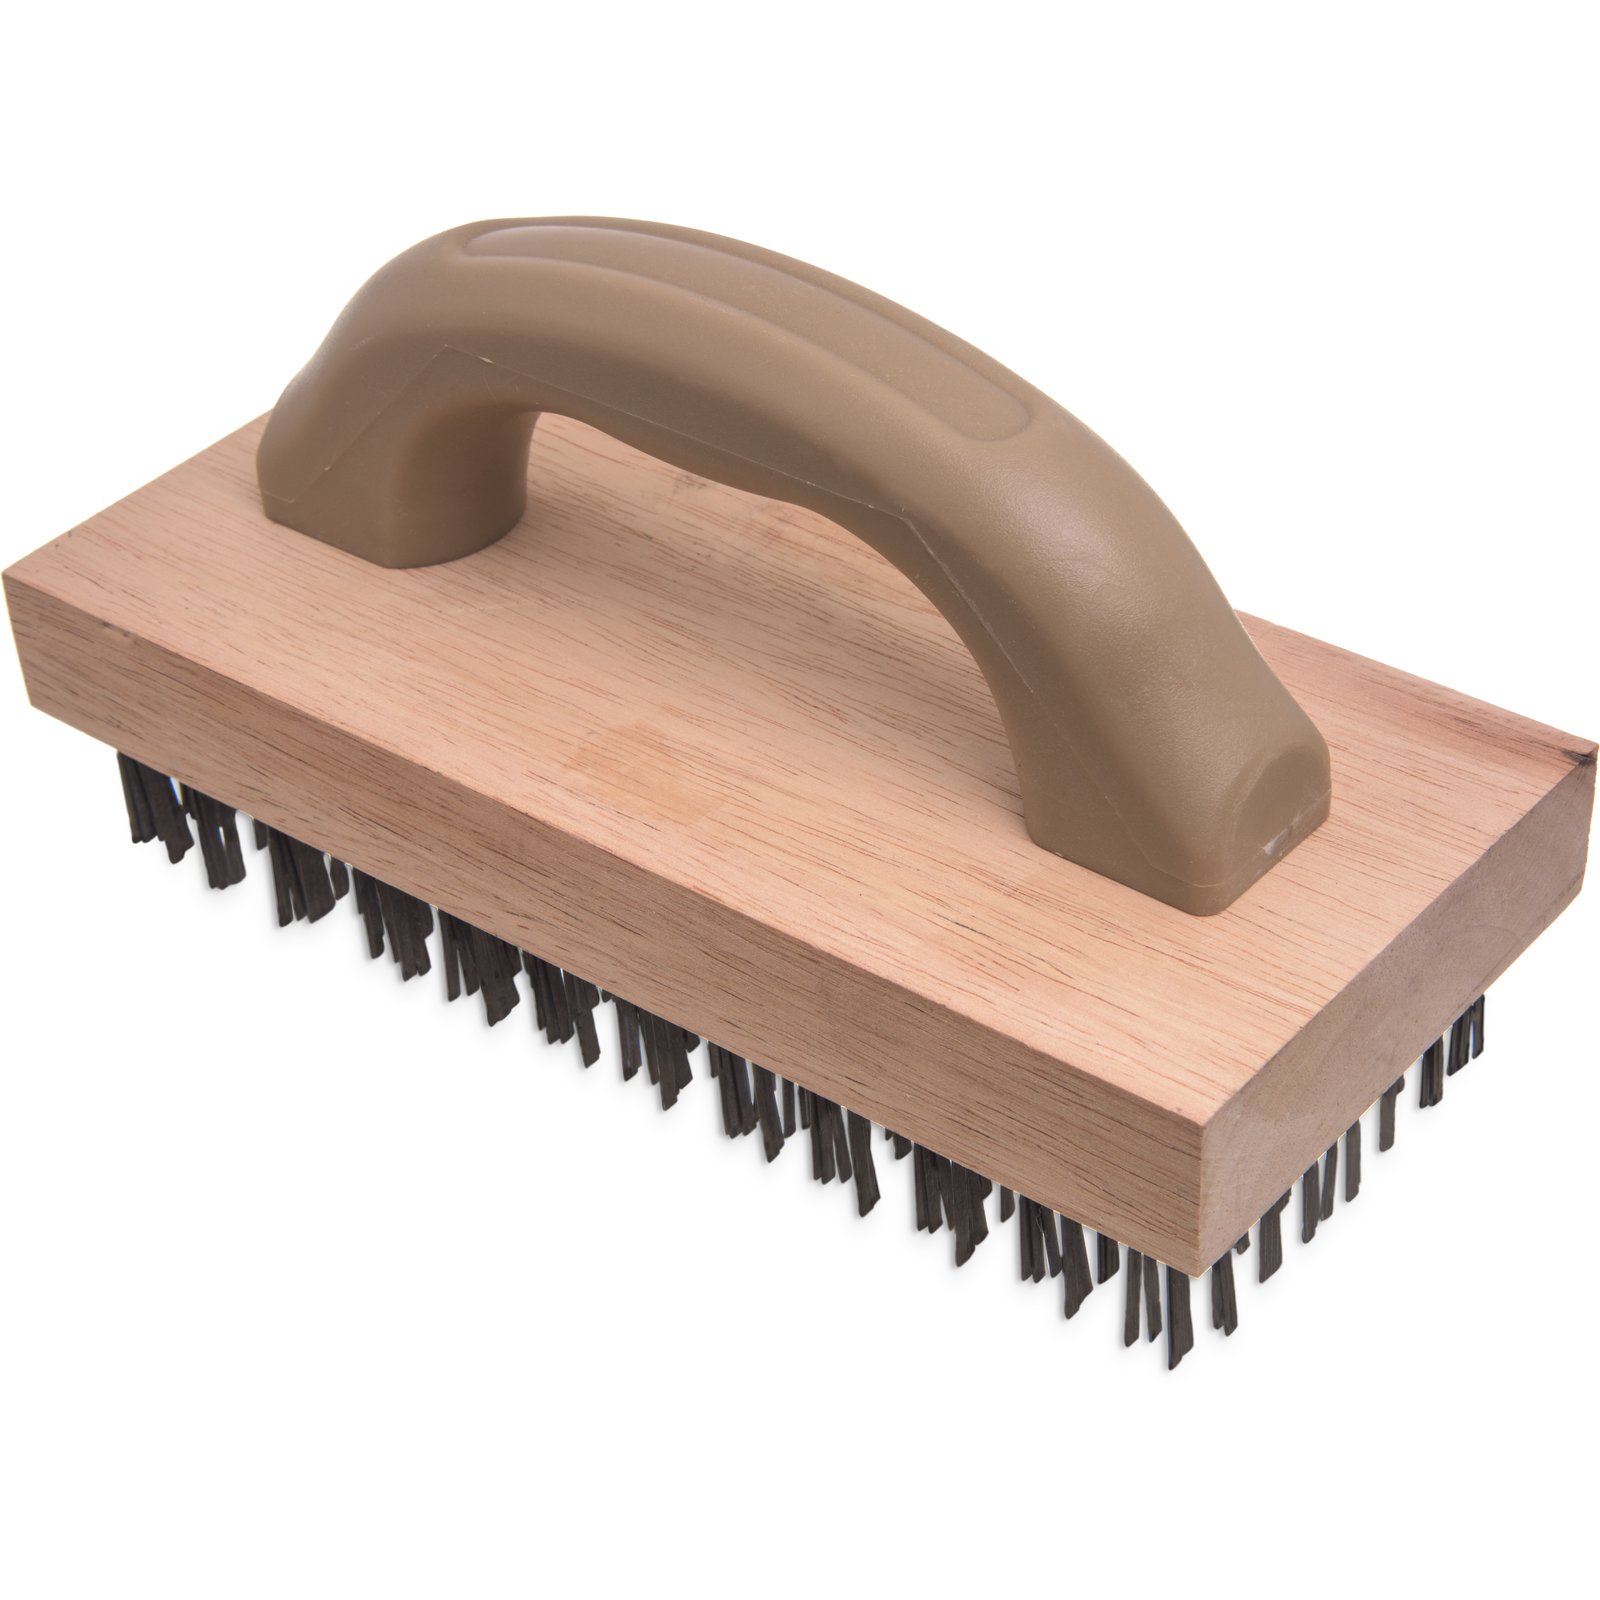 Flat Wire Brush Head for Texas Grill Brush, Horseshoe Handle – OCSParts